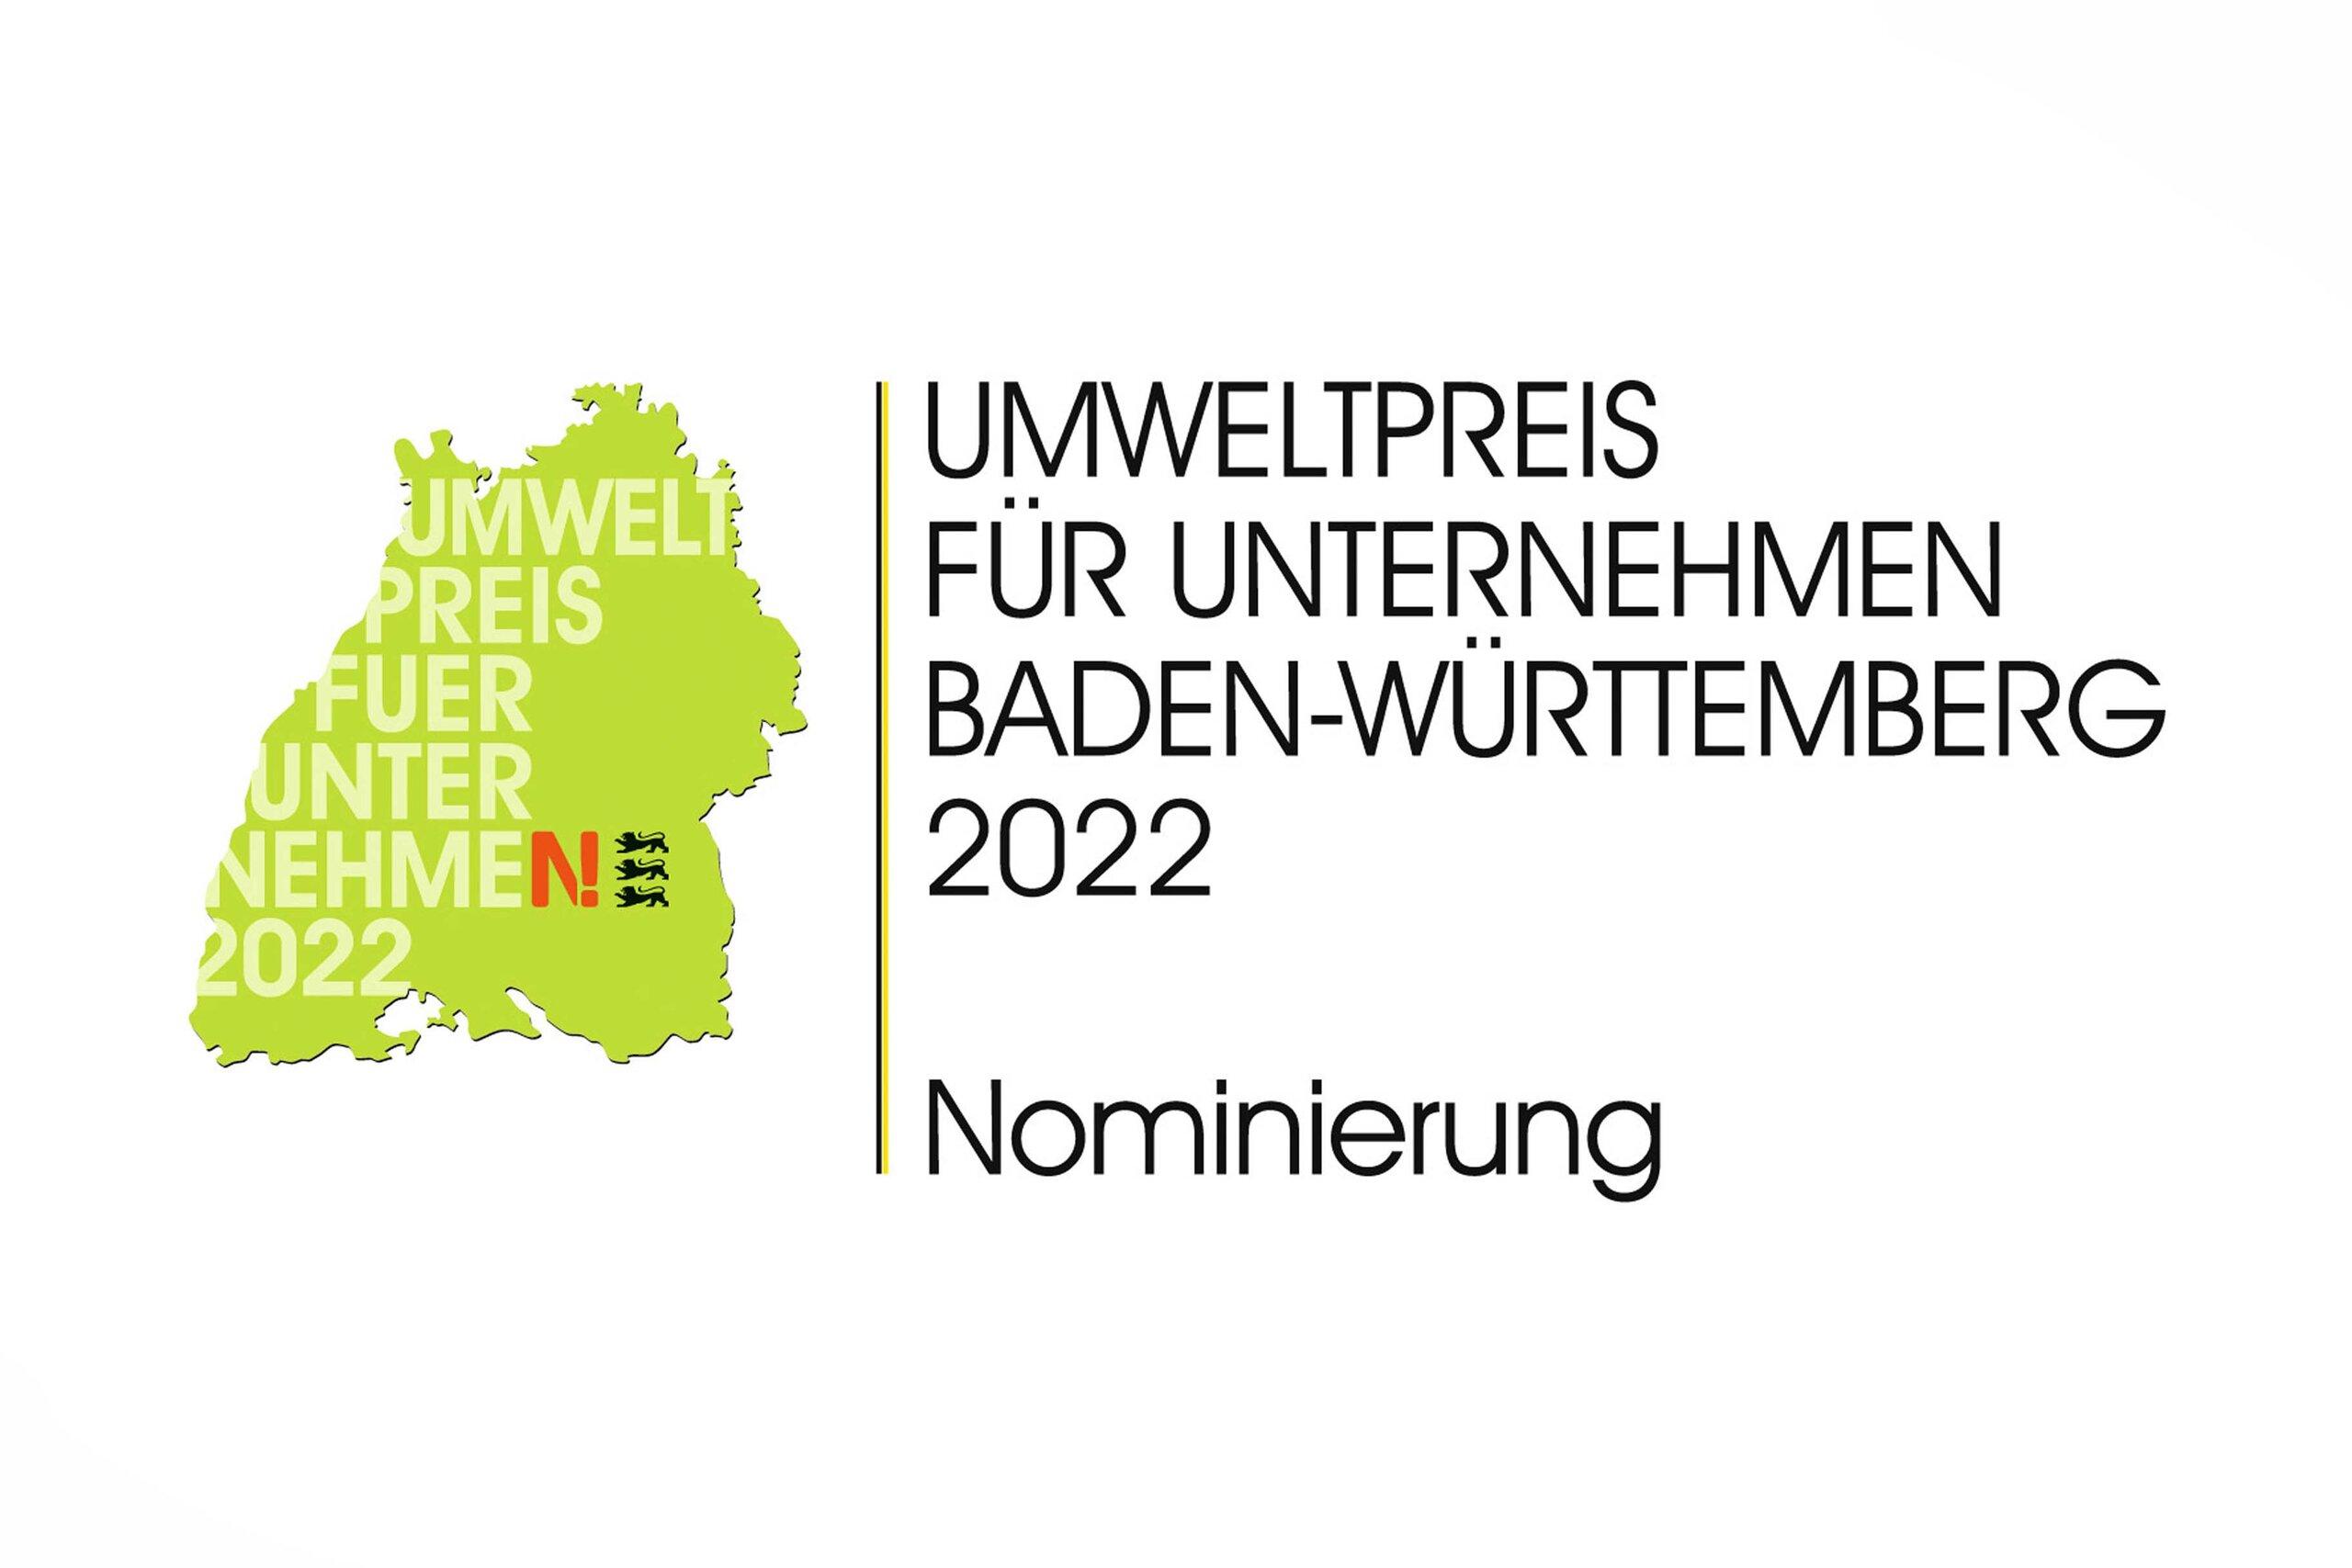 SÜDPACK nominated for the 2022 Environmental Award of the State of Baden-Württemberg in the category "Industrial Companies with more than 250 Employees